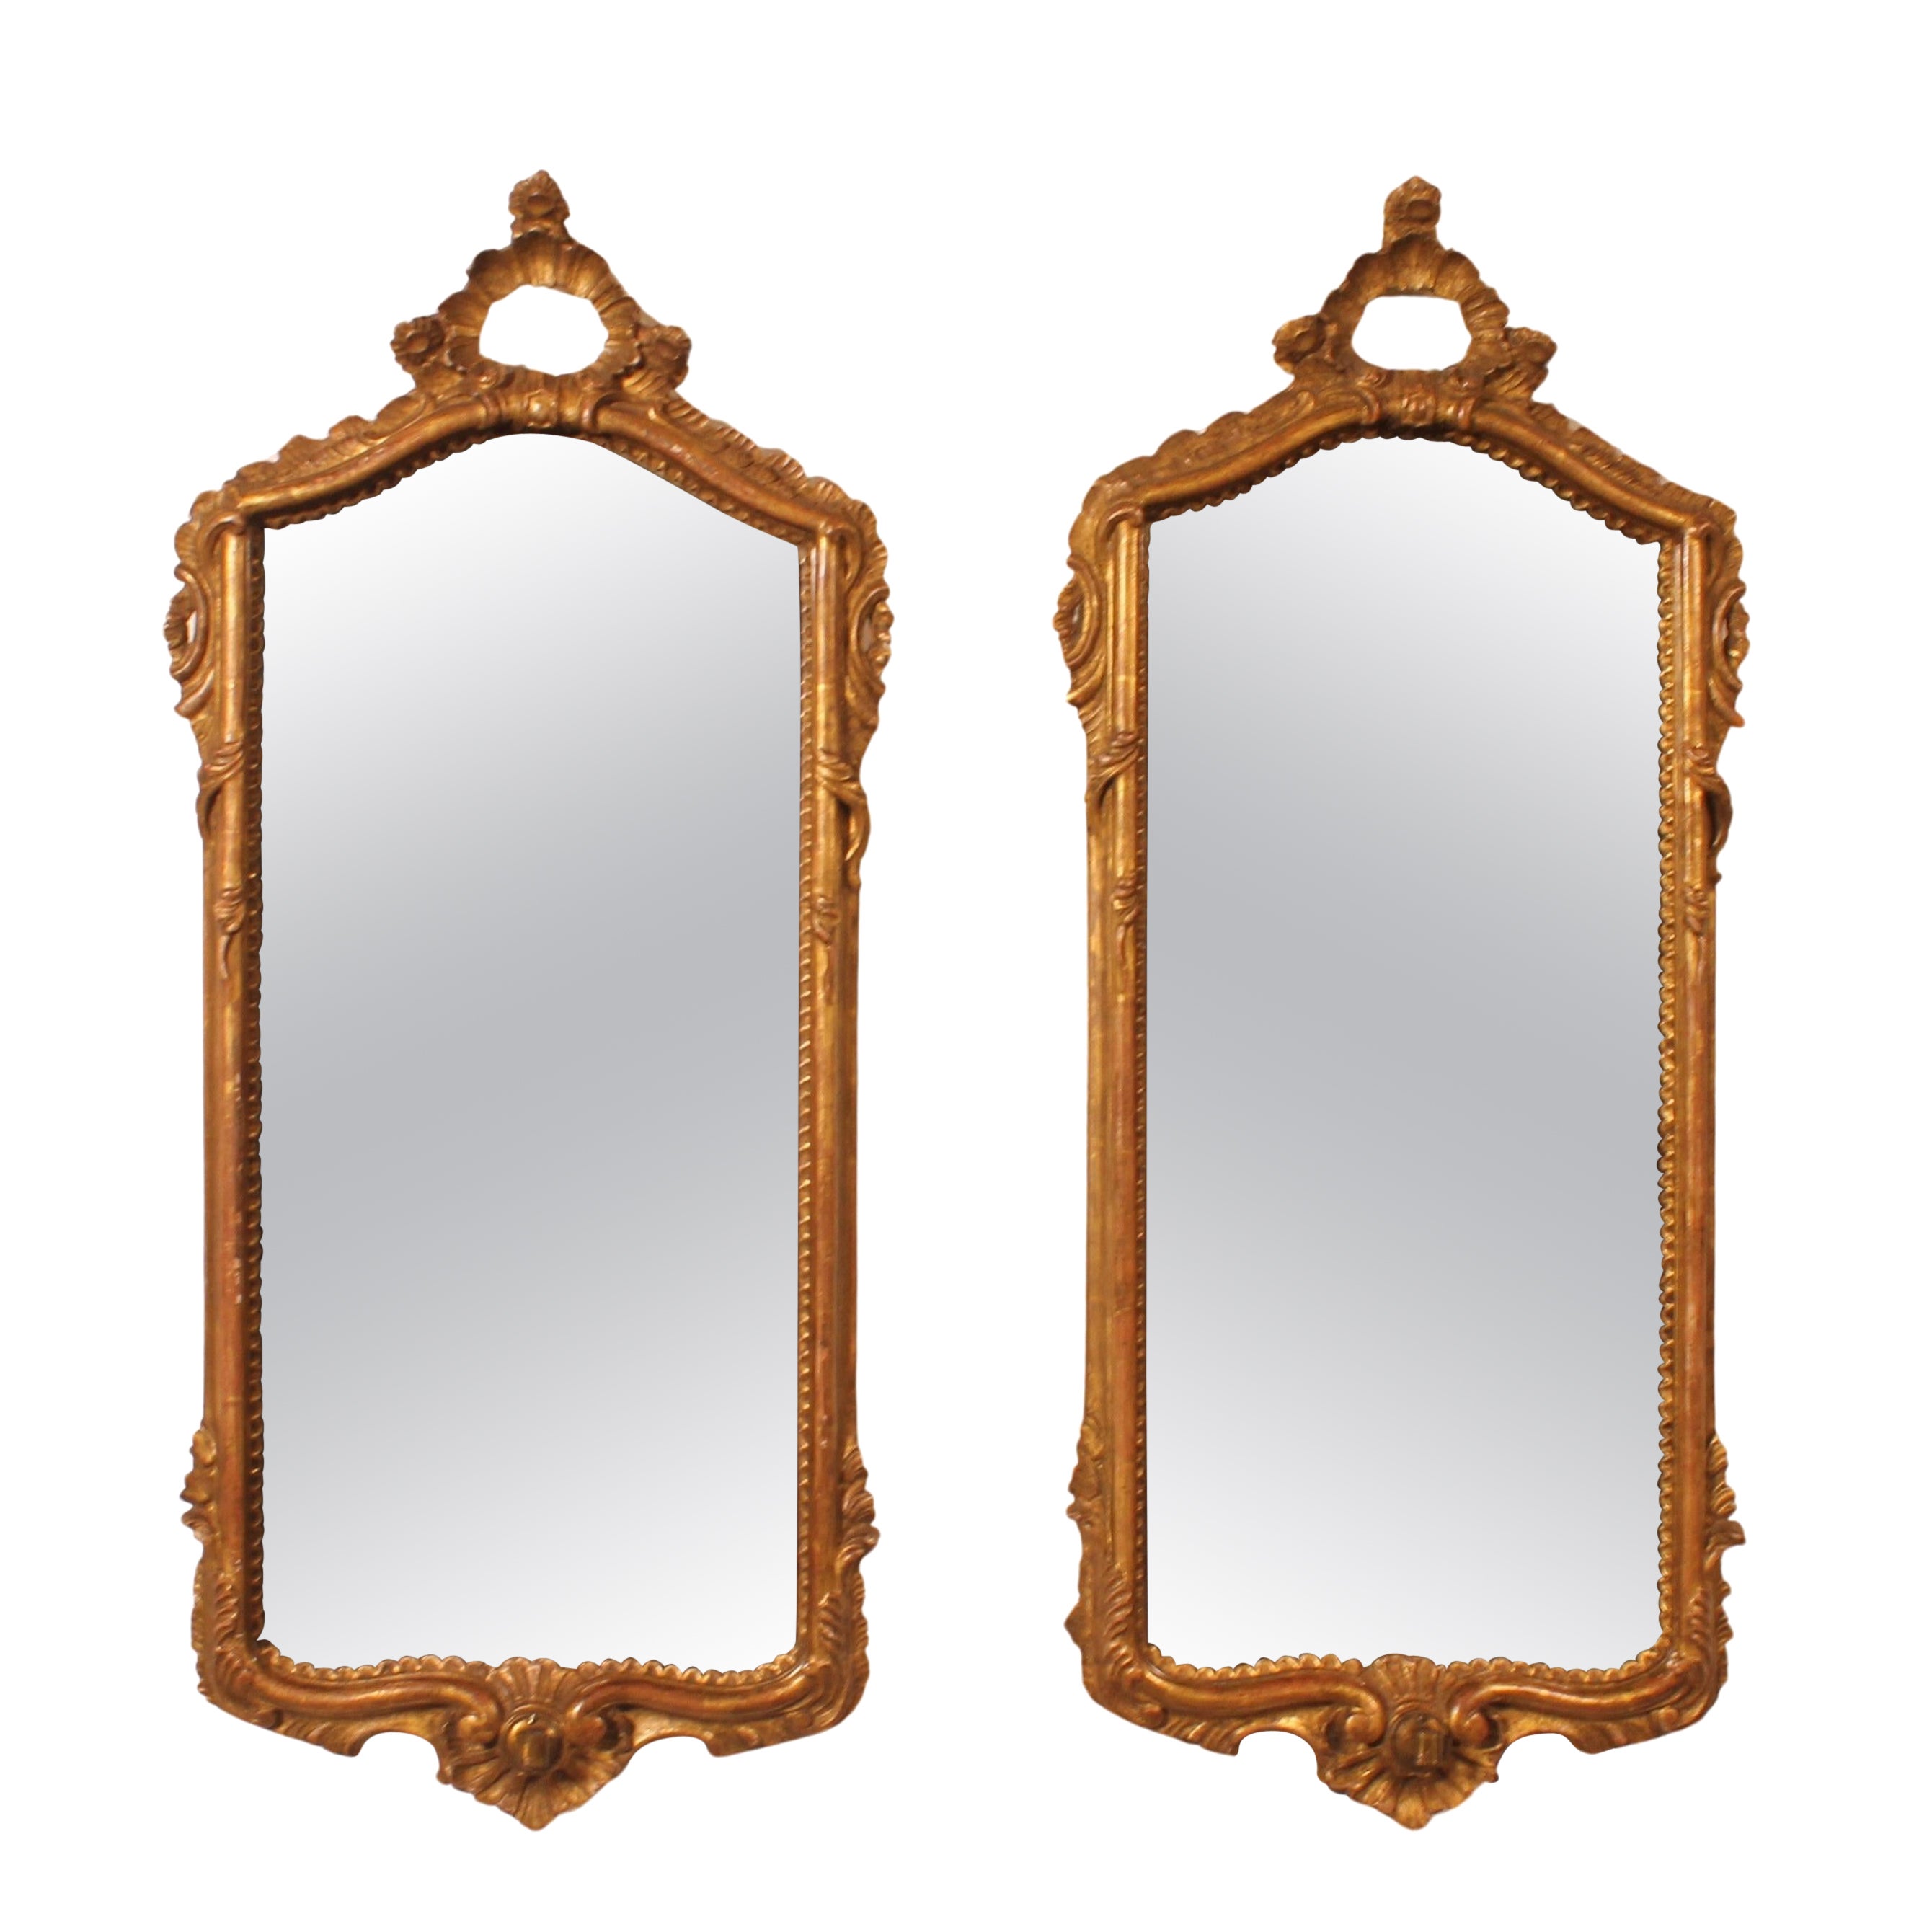 Pair Of Carved And Gilded Wooden Mirrors